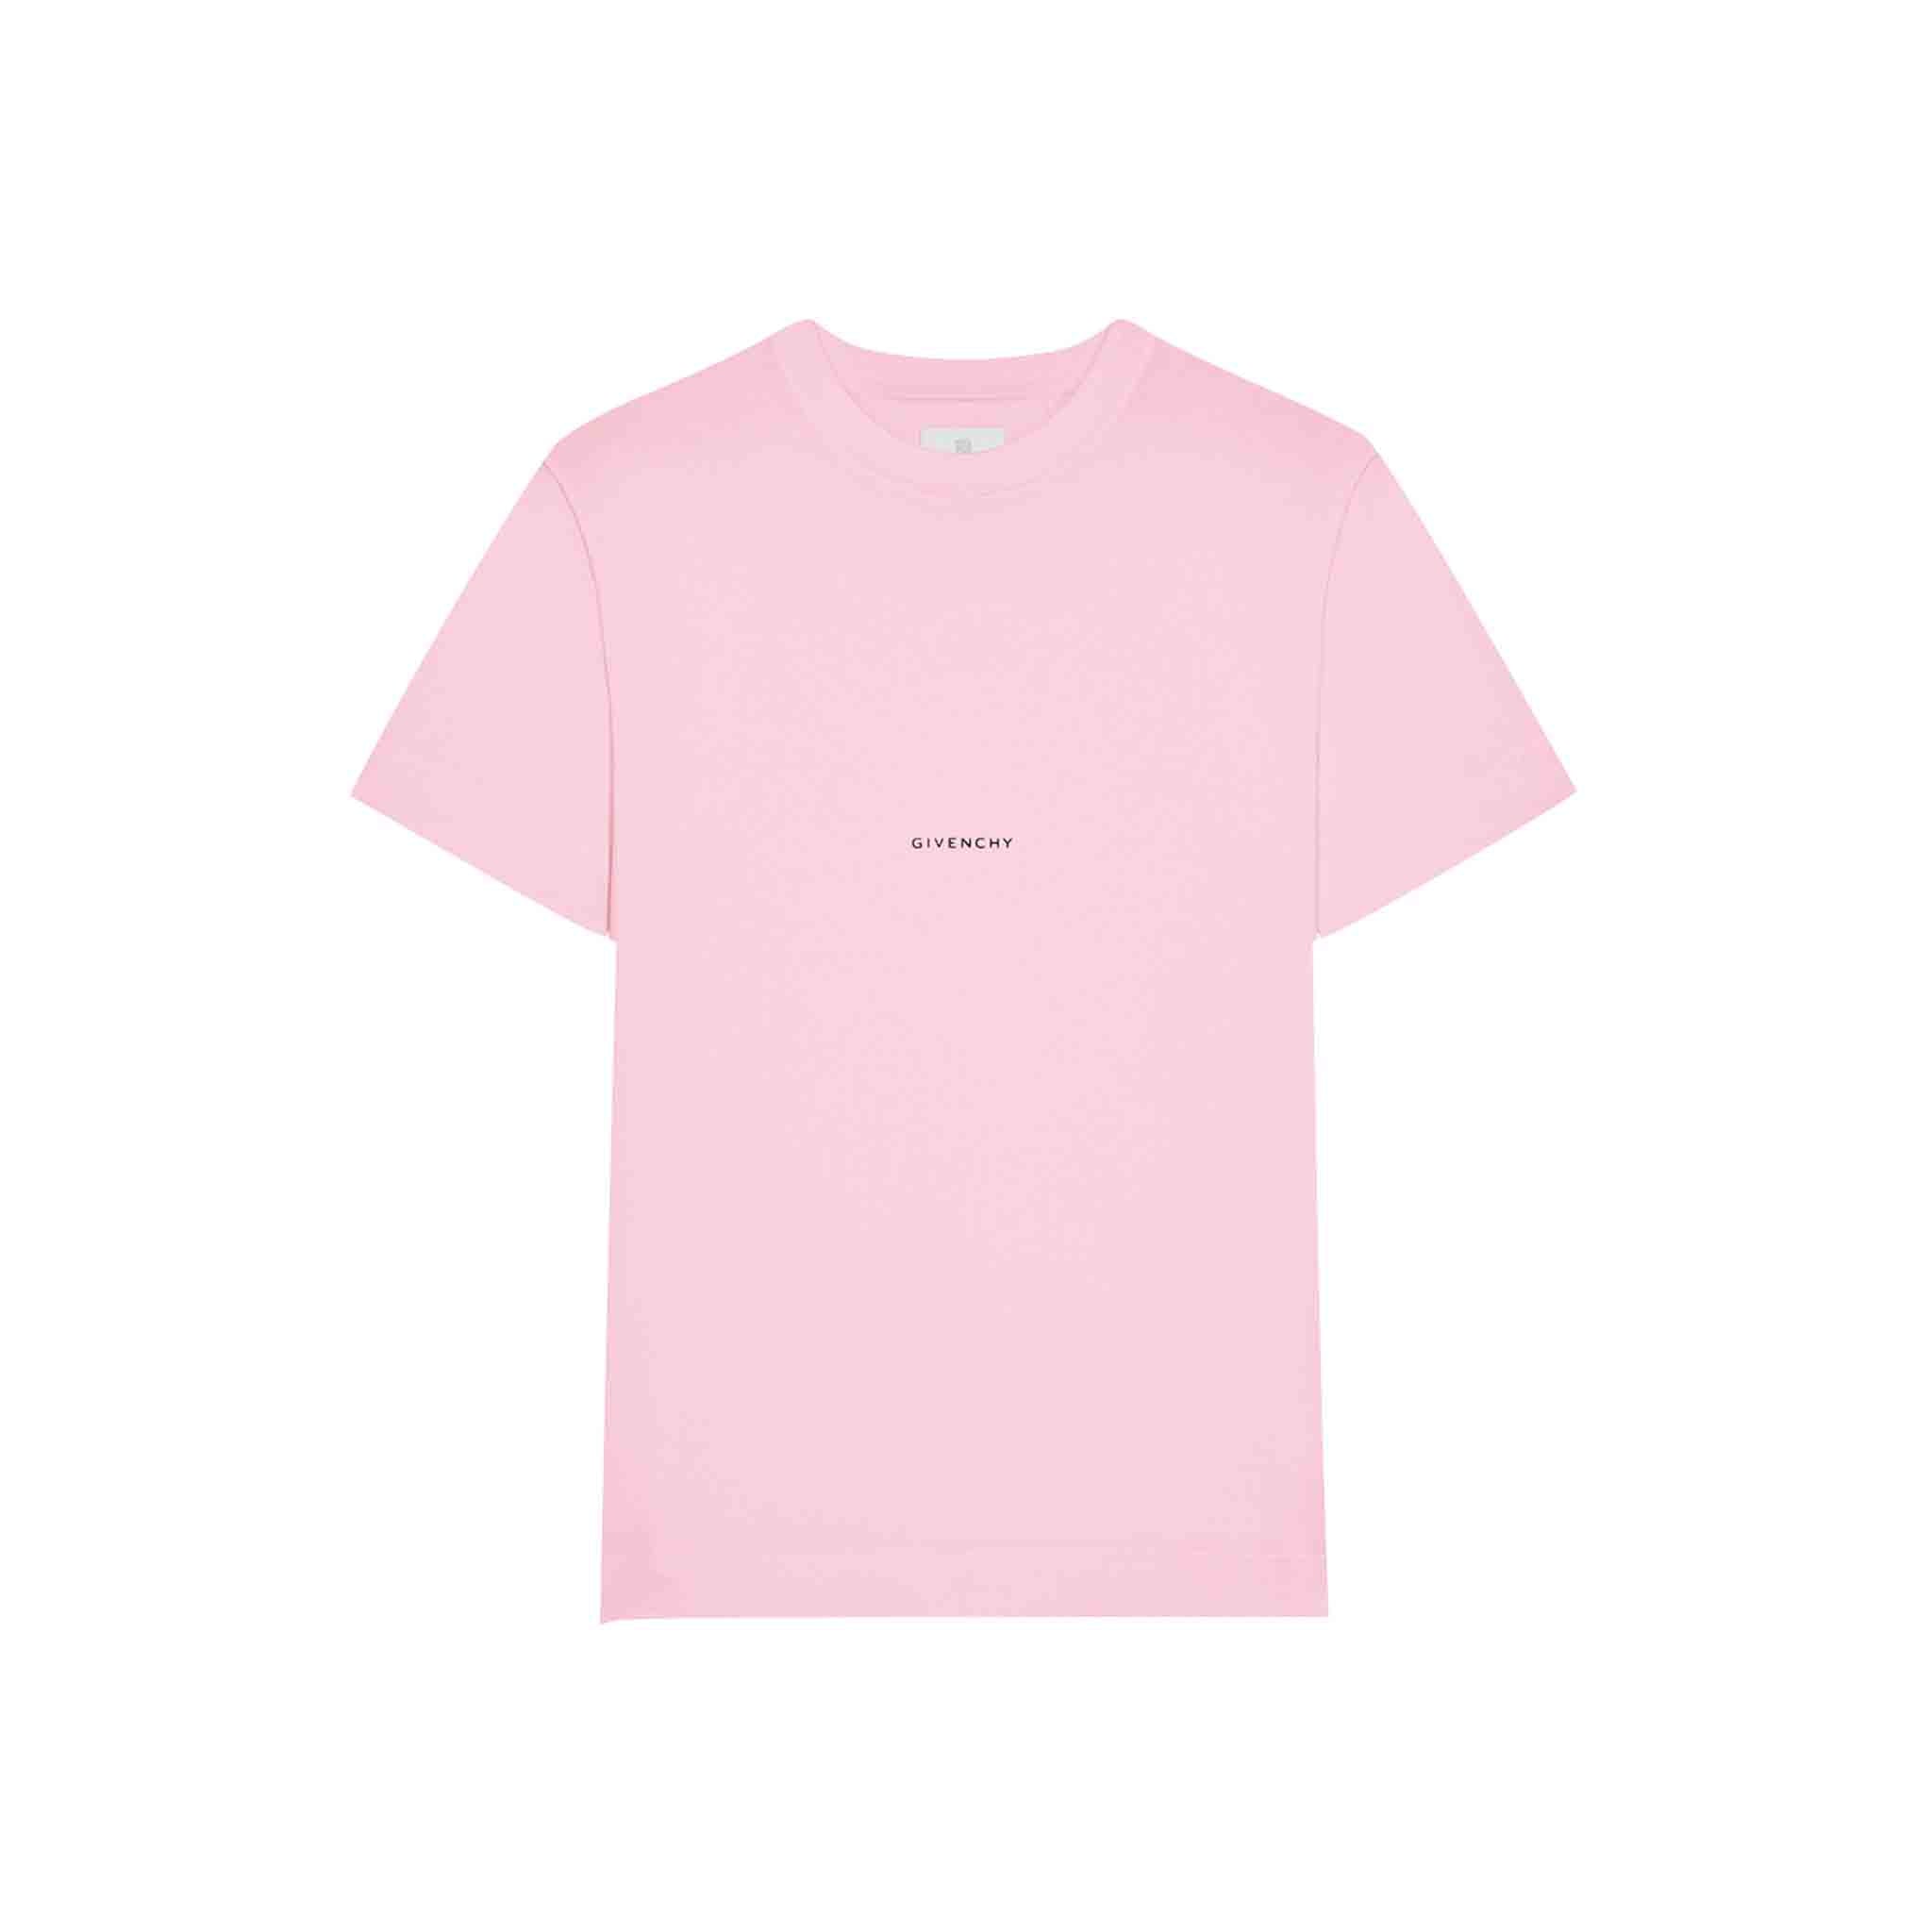 Givenchy Small Logo Slim Fit T-Shirt in Light Pink